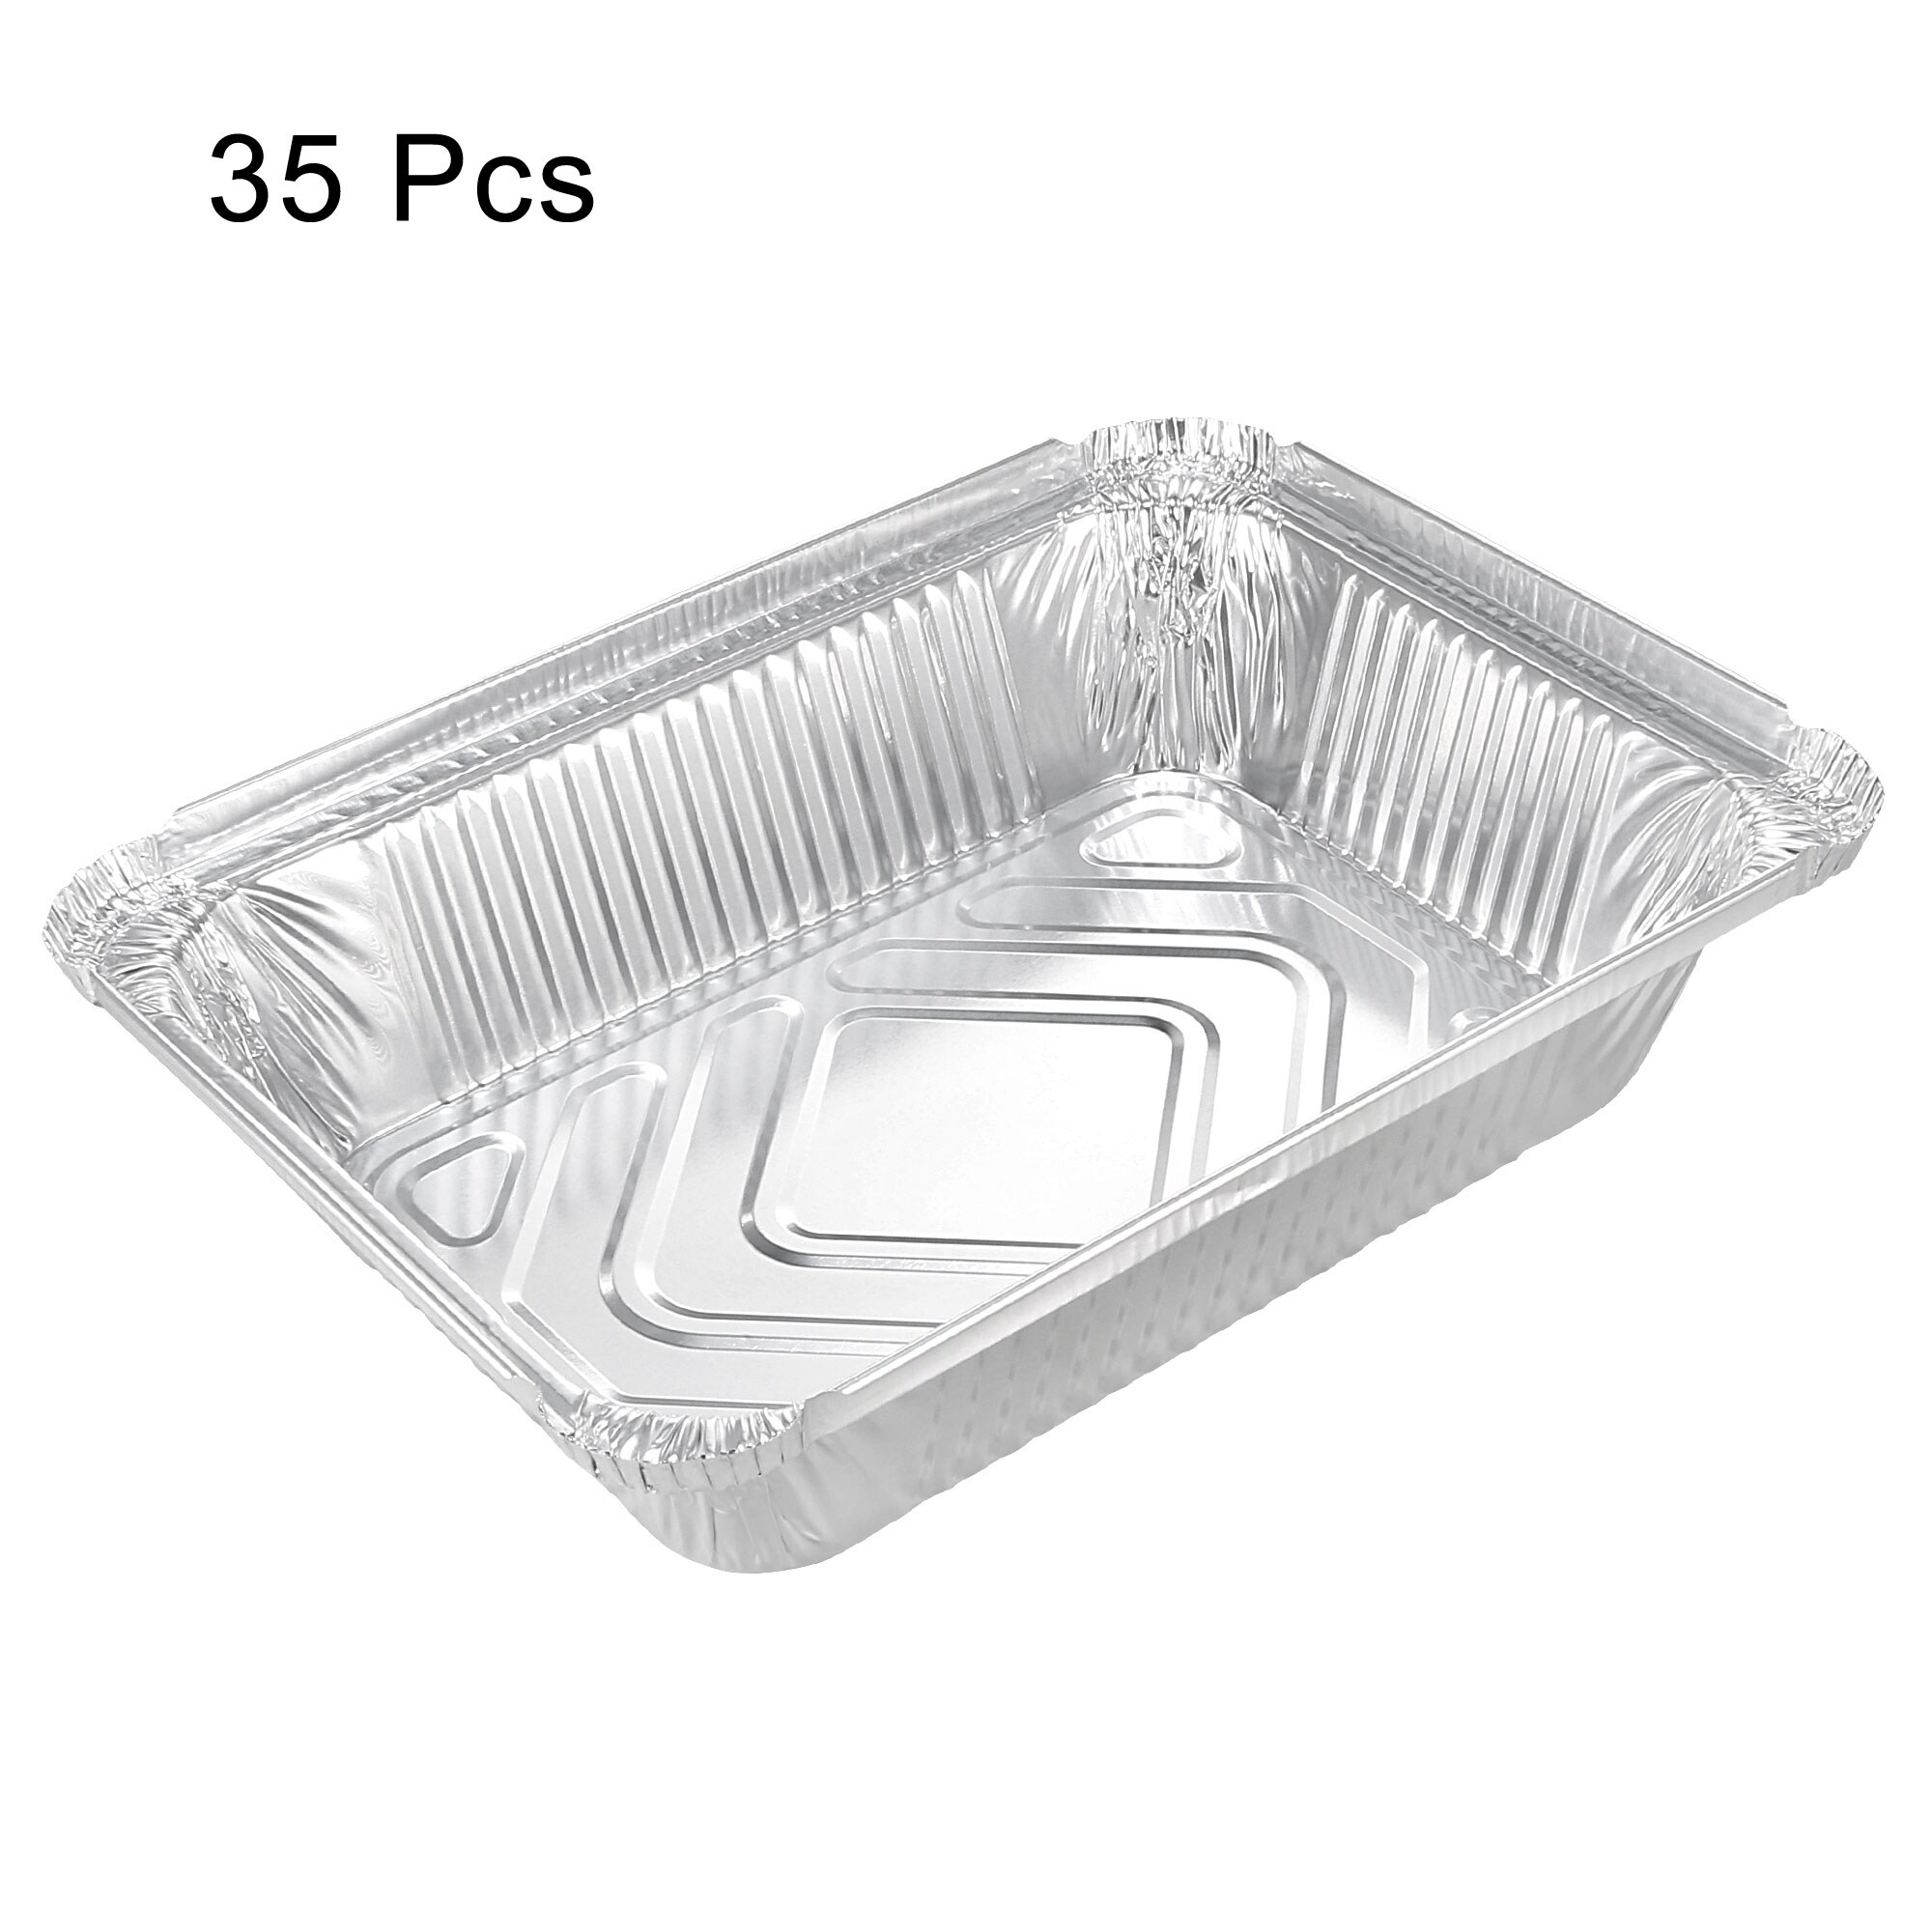 https://ak1.ostkcdn.com/images/products/is/images/direct/aa46dda8437cd26f83e86aca622a85b1aa4ddcc1/8.7%22-x-6.3%22-Aluminum-Foil-Pans%2C-37oz-Disposable-Trays-Containers-35pcs.jpg